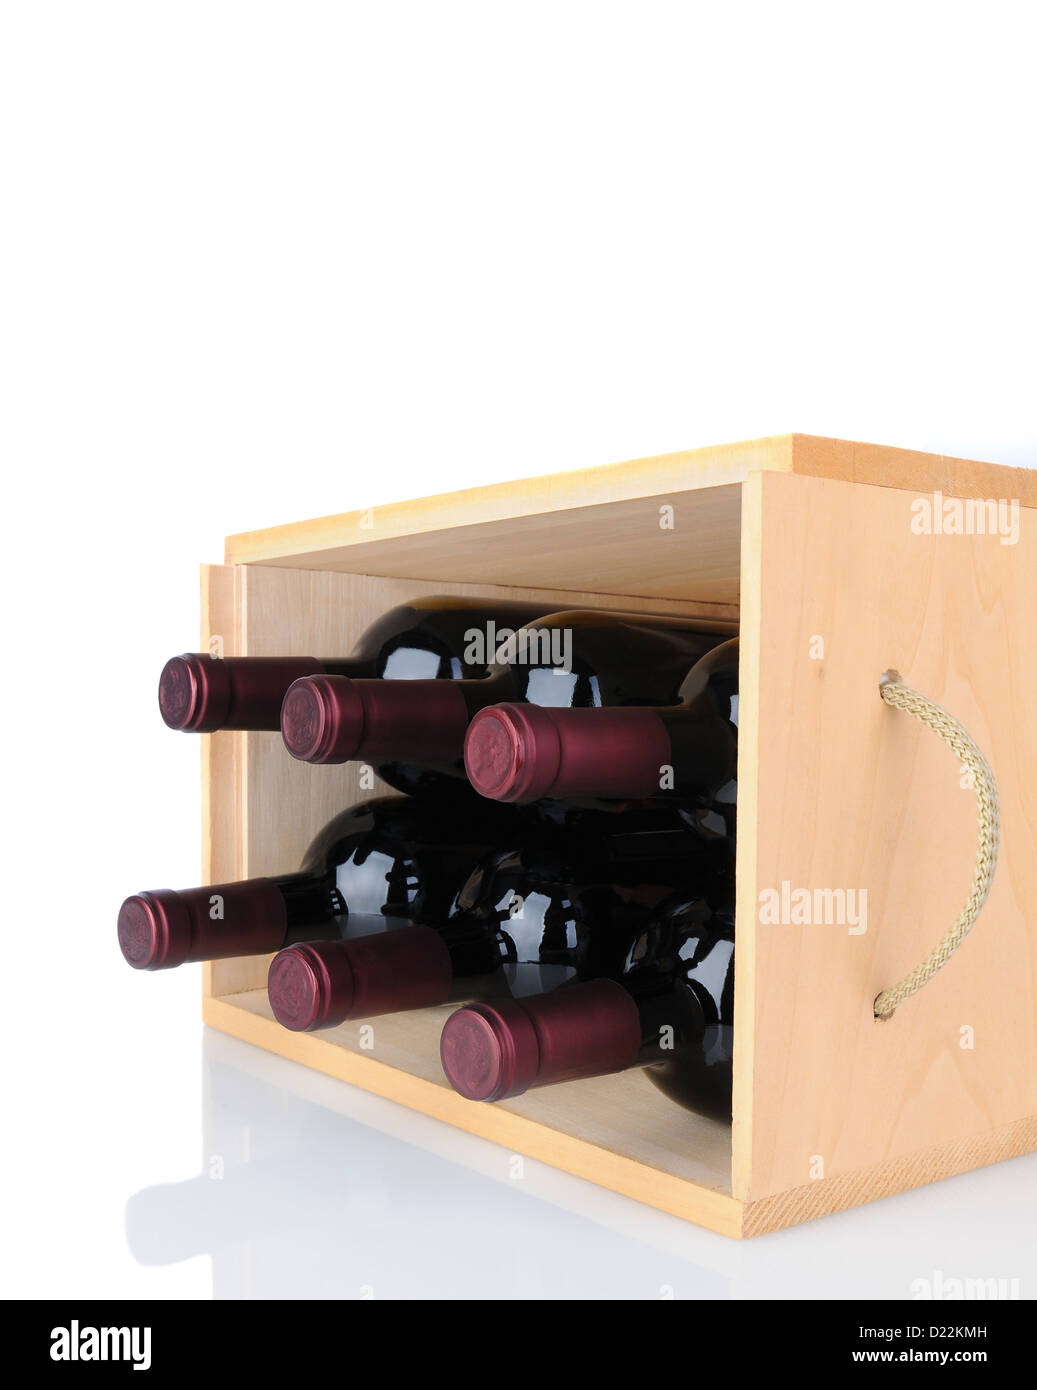 Closeup of six Cabernet Sauvignon wine bottles in a wooden crate laying on its side. Stock Photo